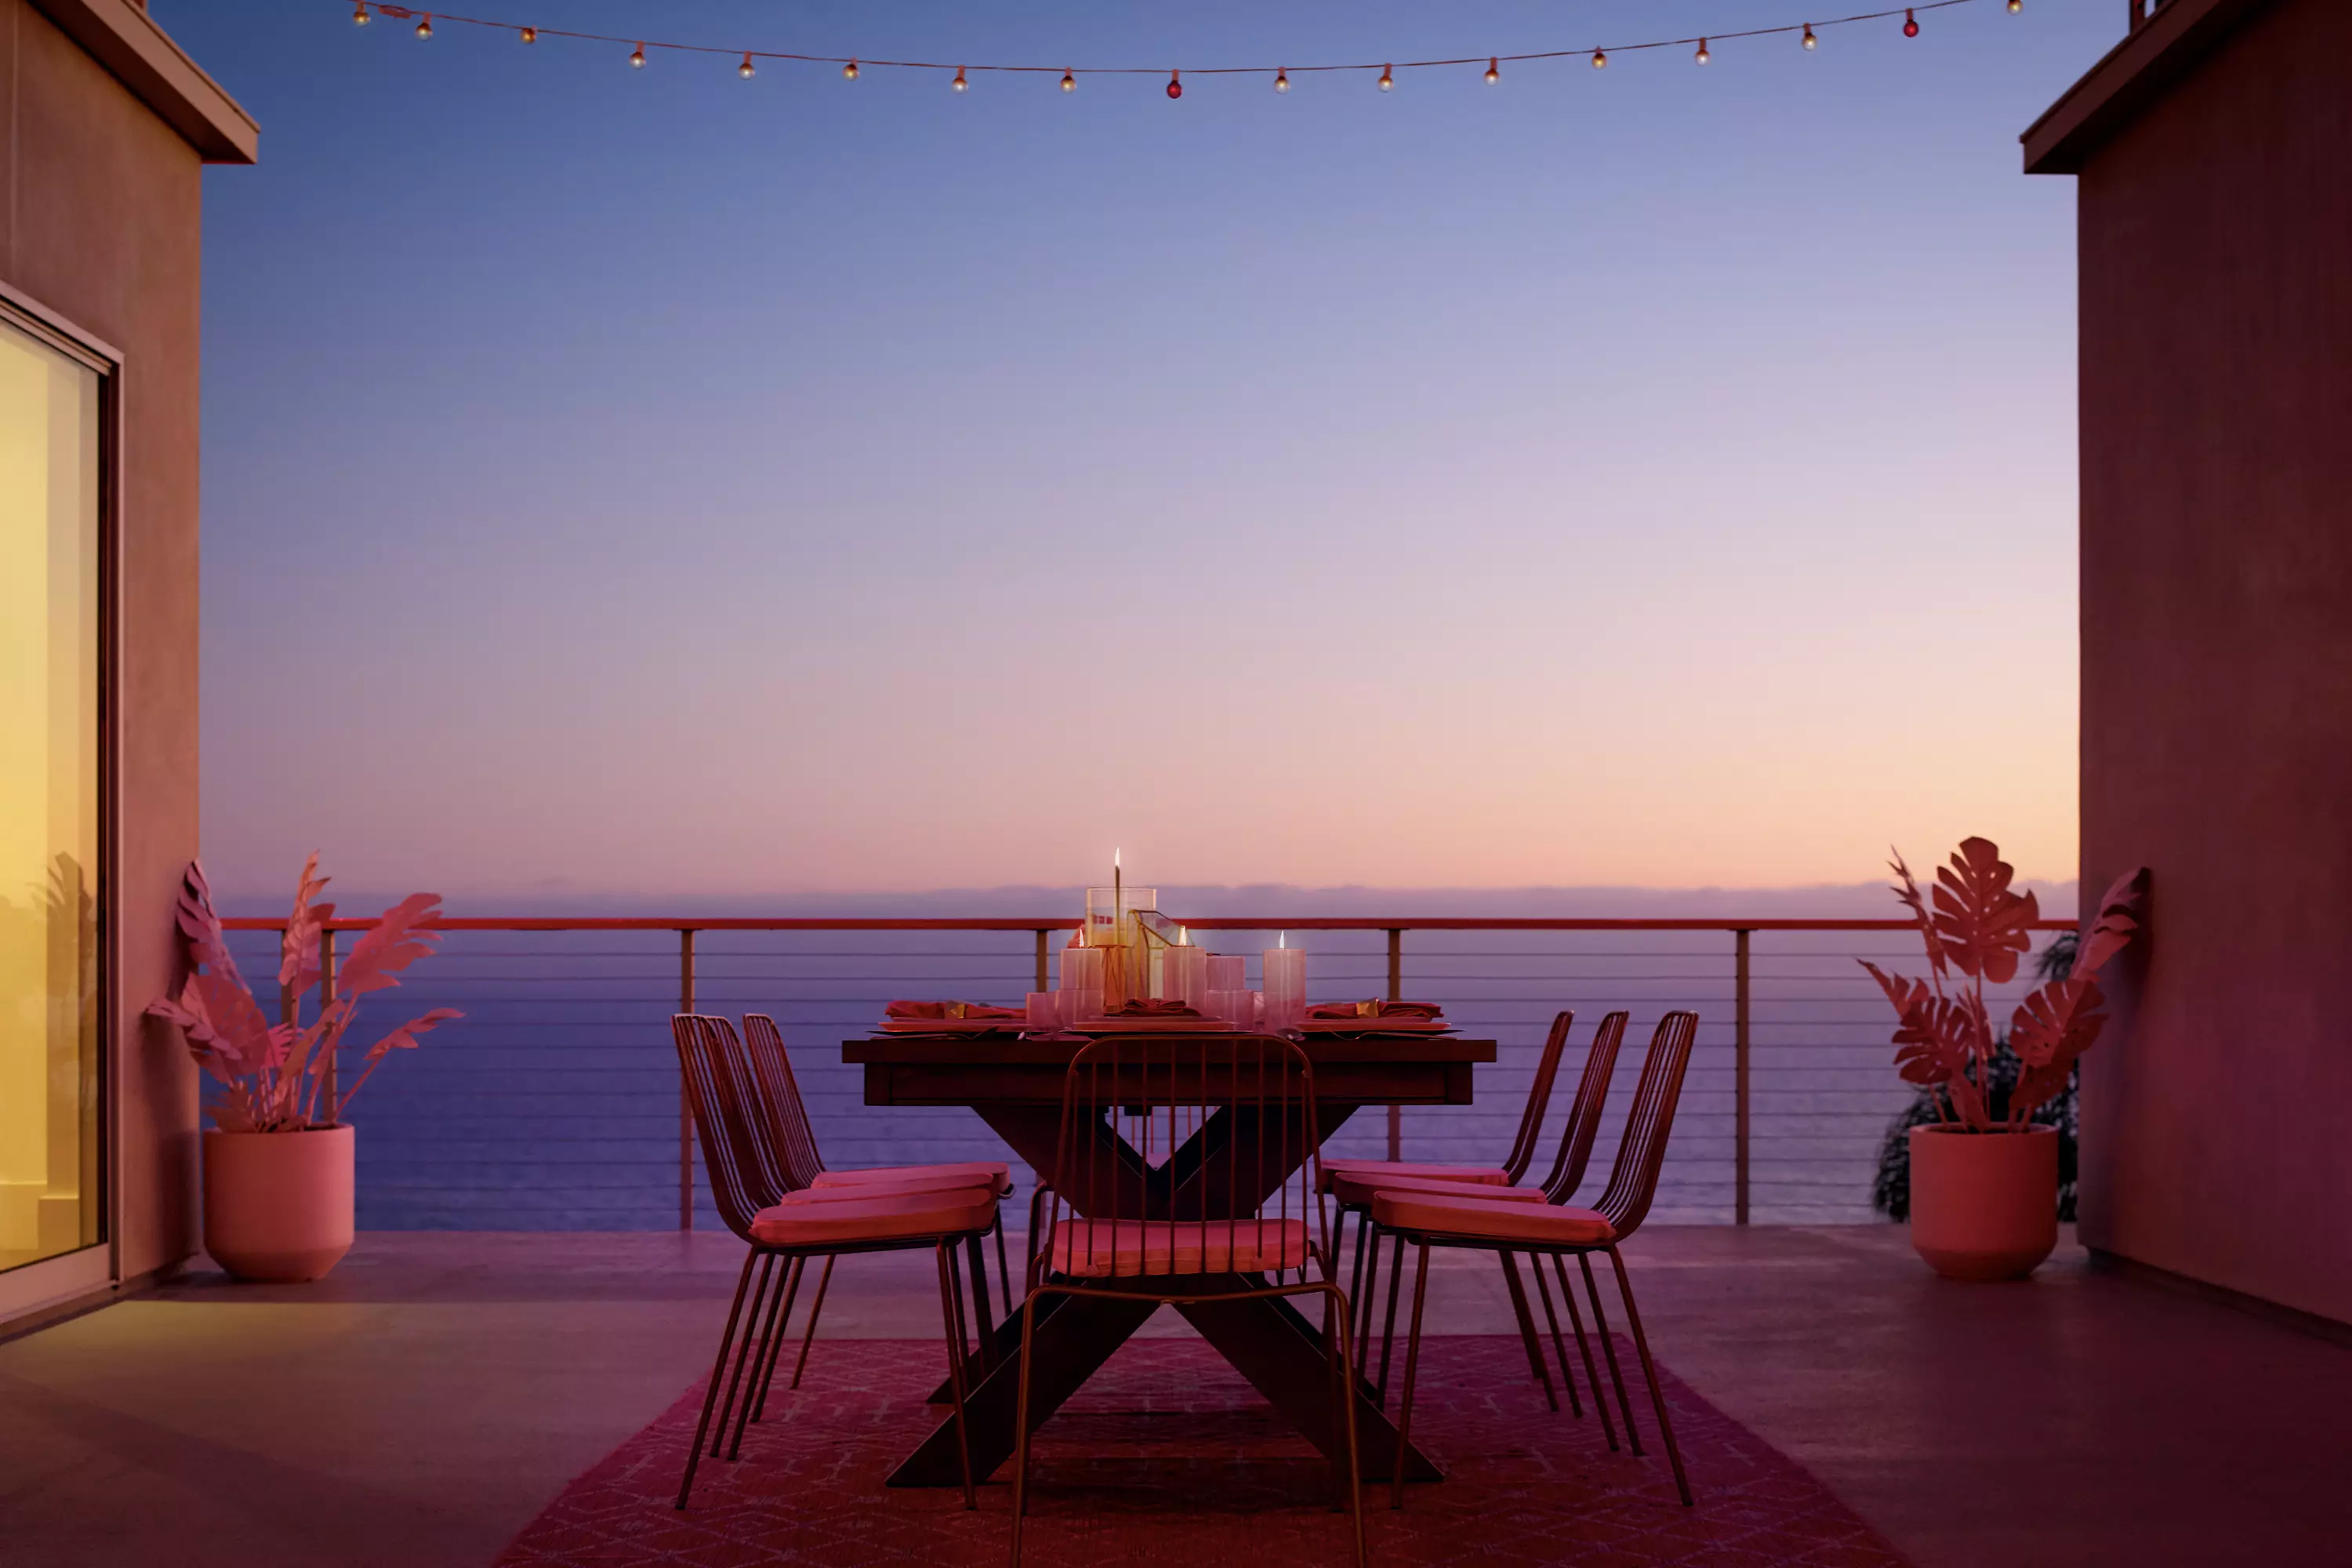 You and your friends can enjoy dinner on the terrace with incredible sunsets promised. (